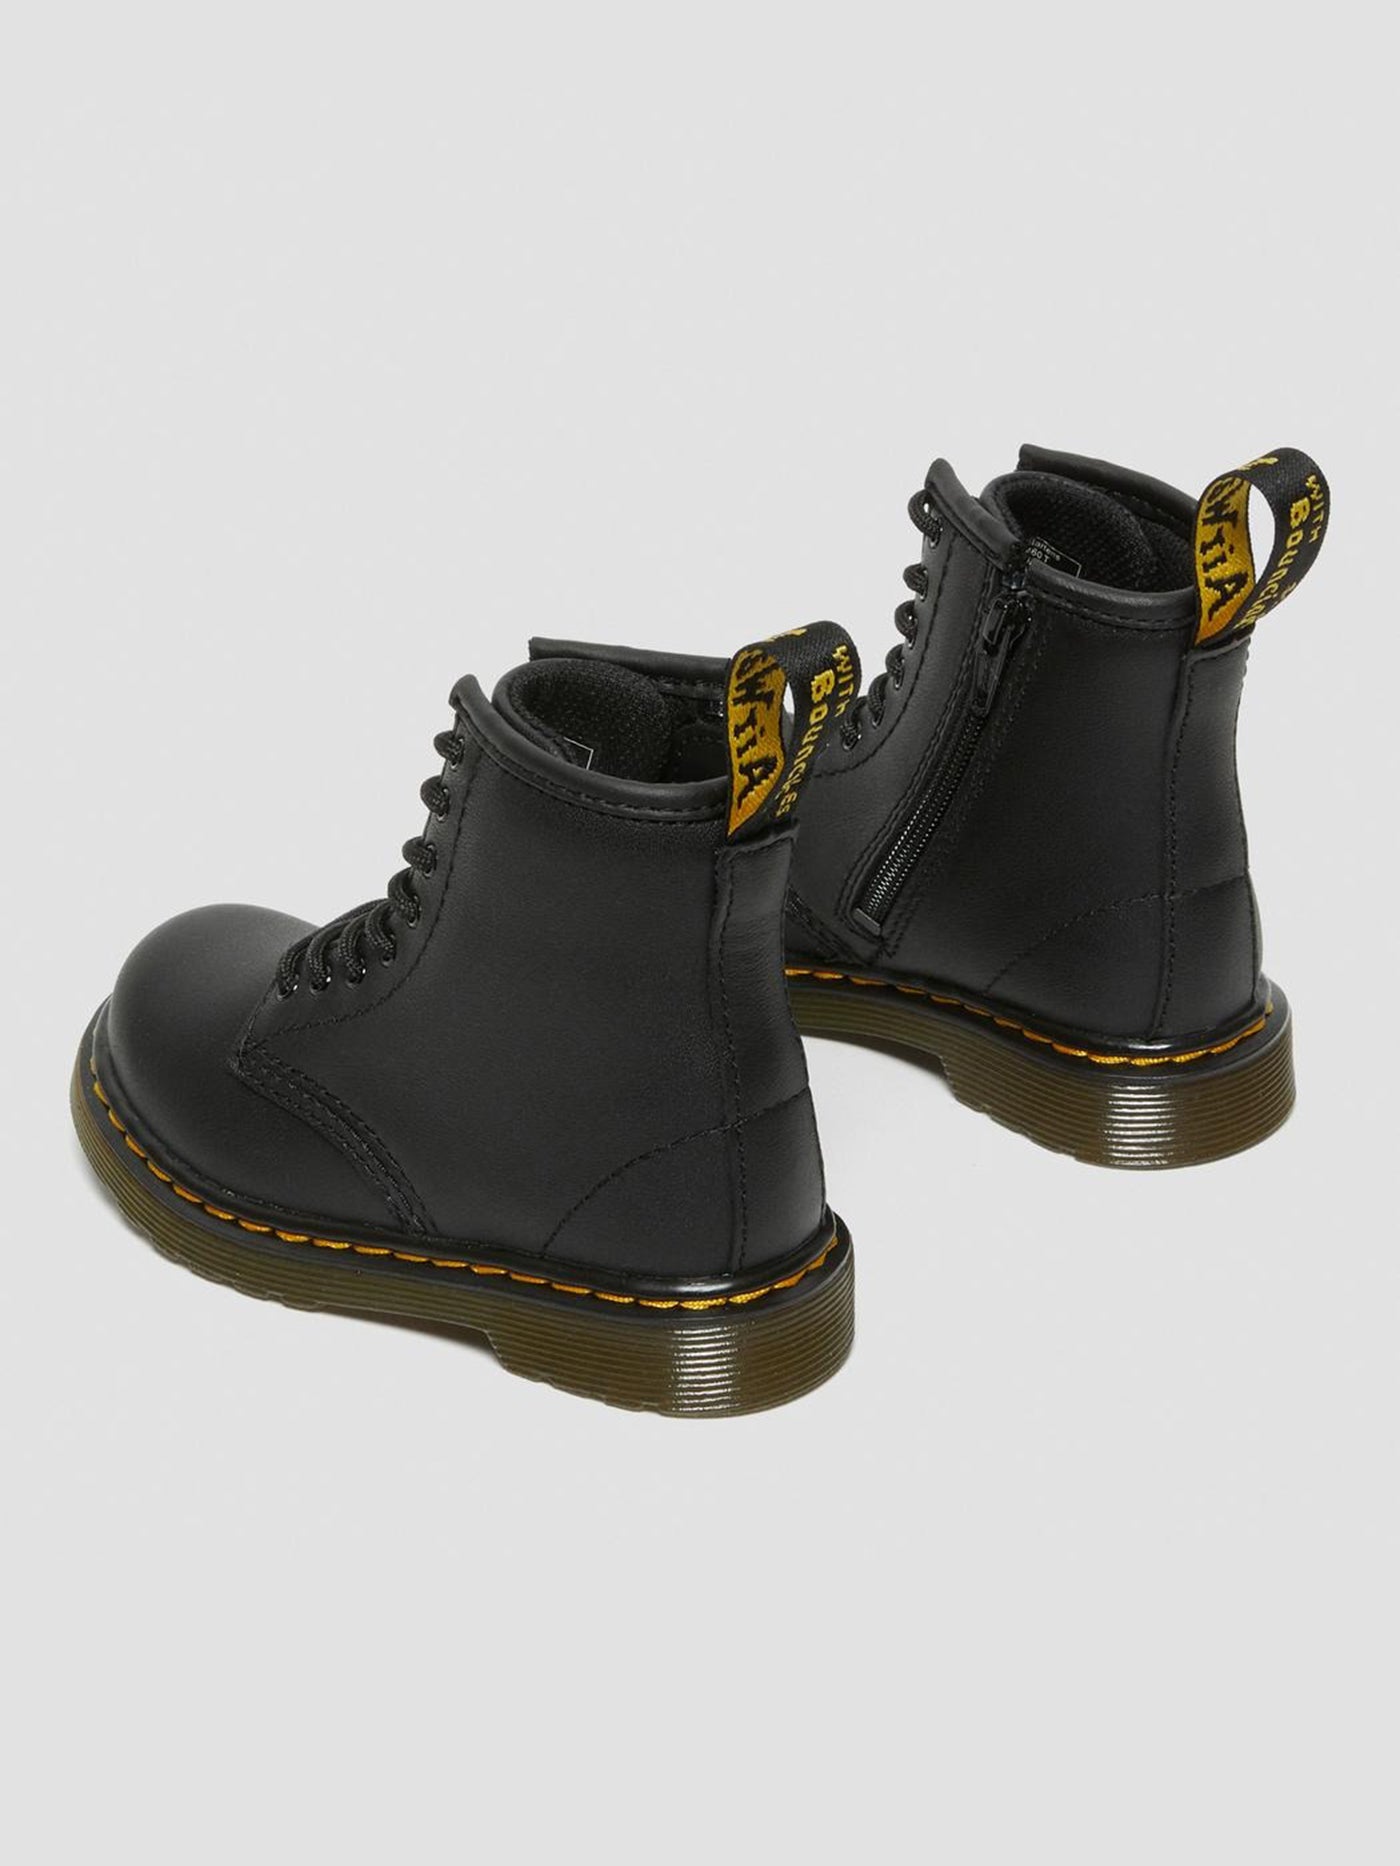 Dr. Martens 1460 Softy T Black Boots